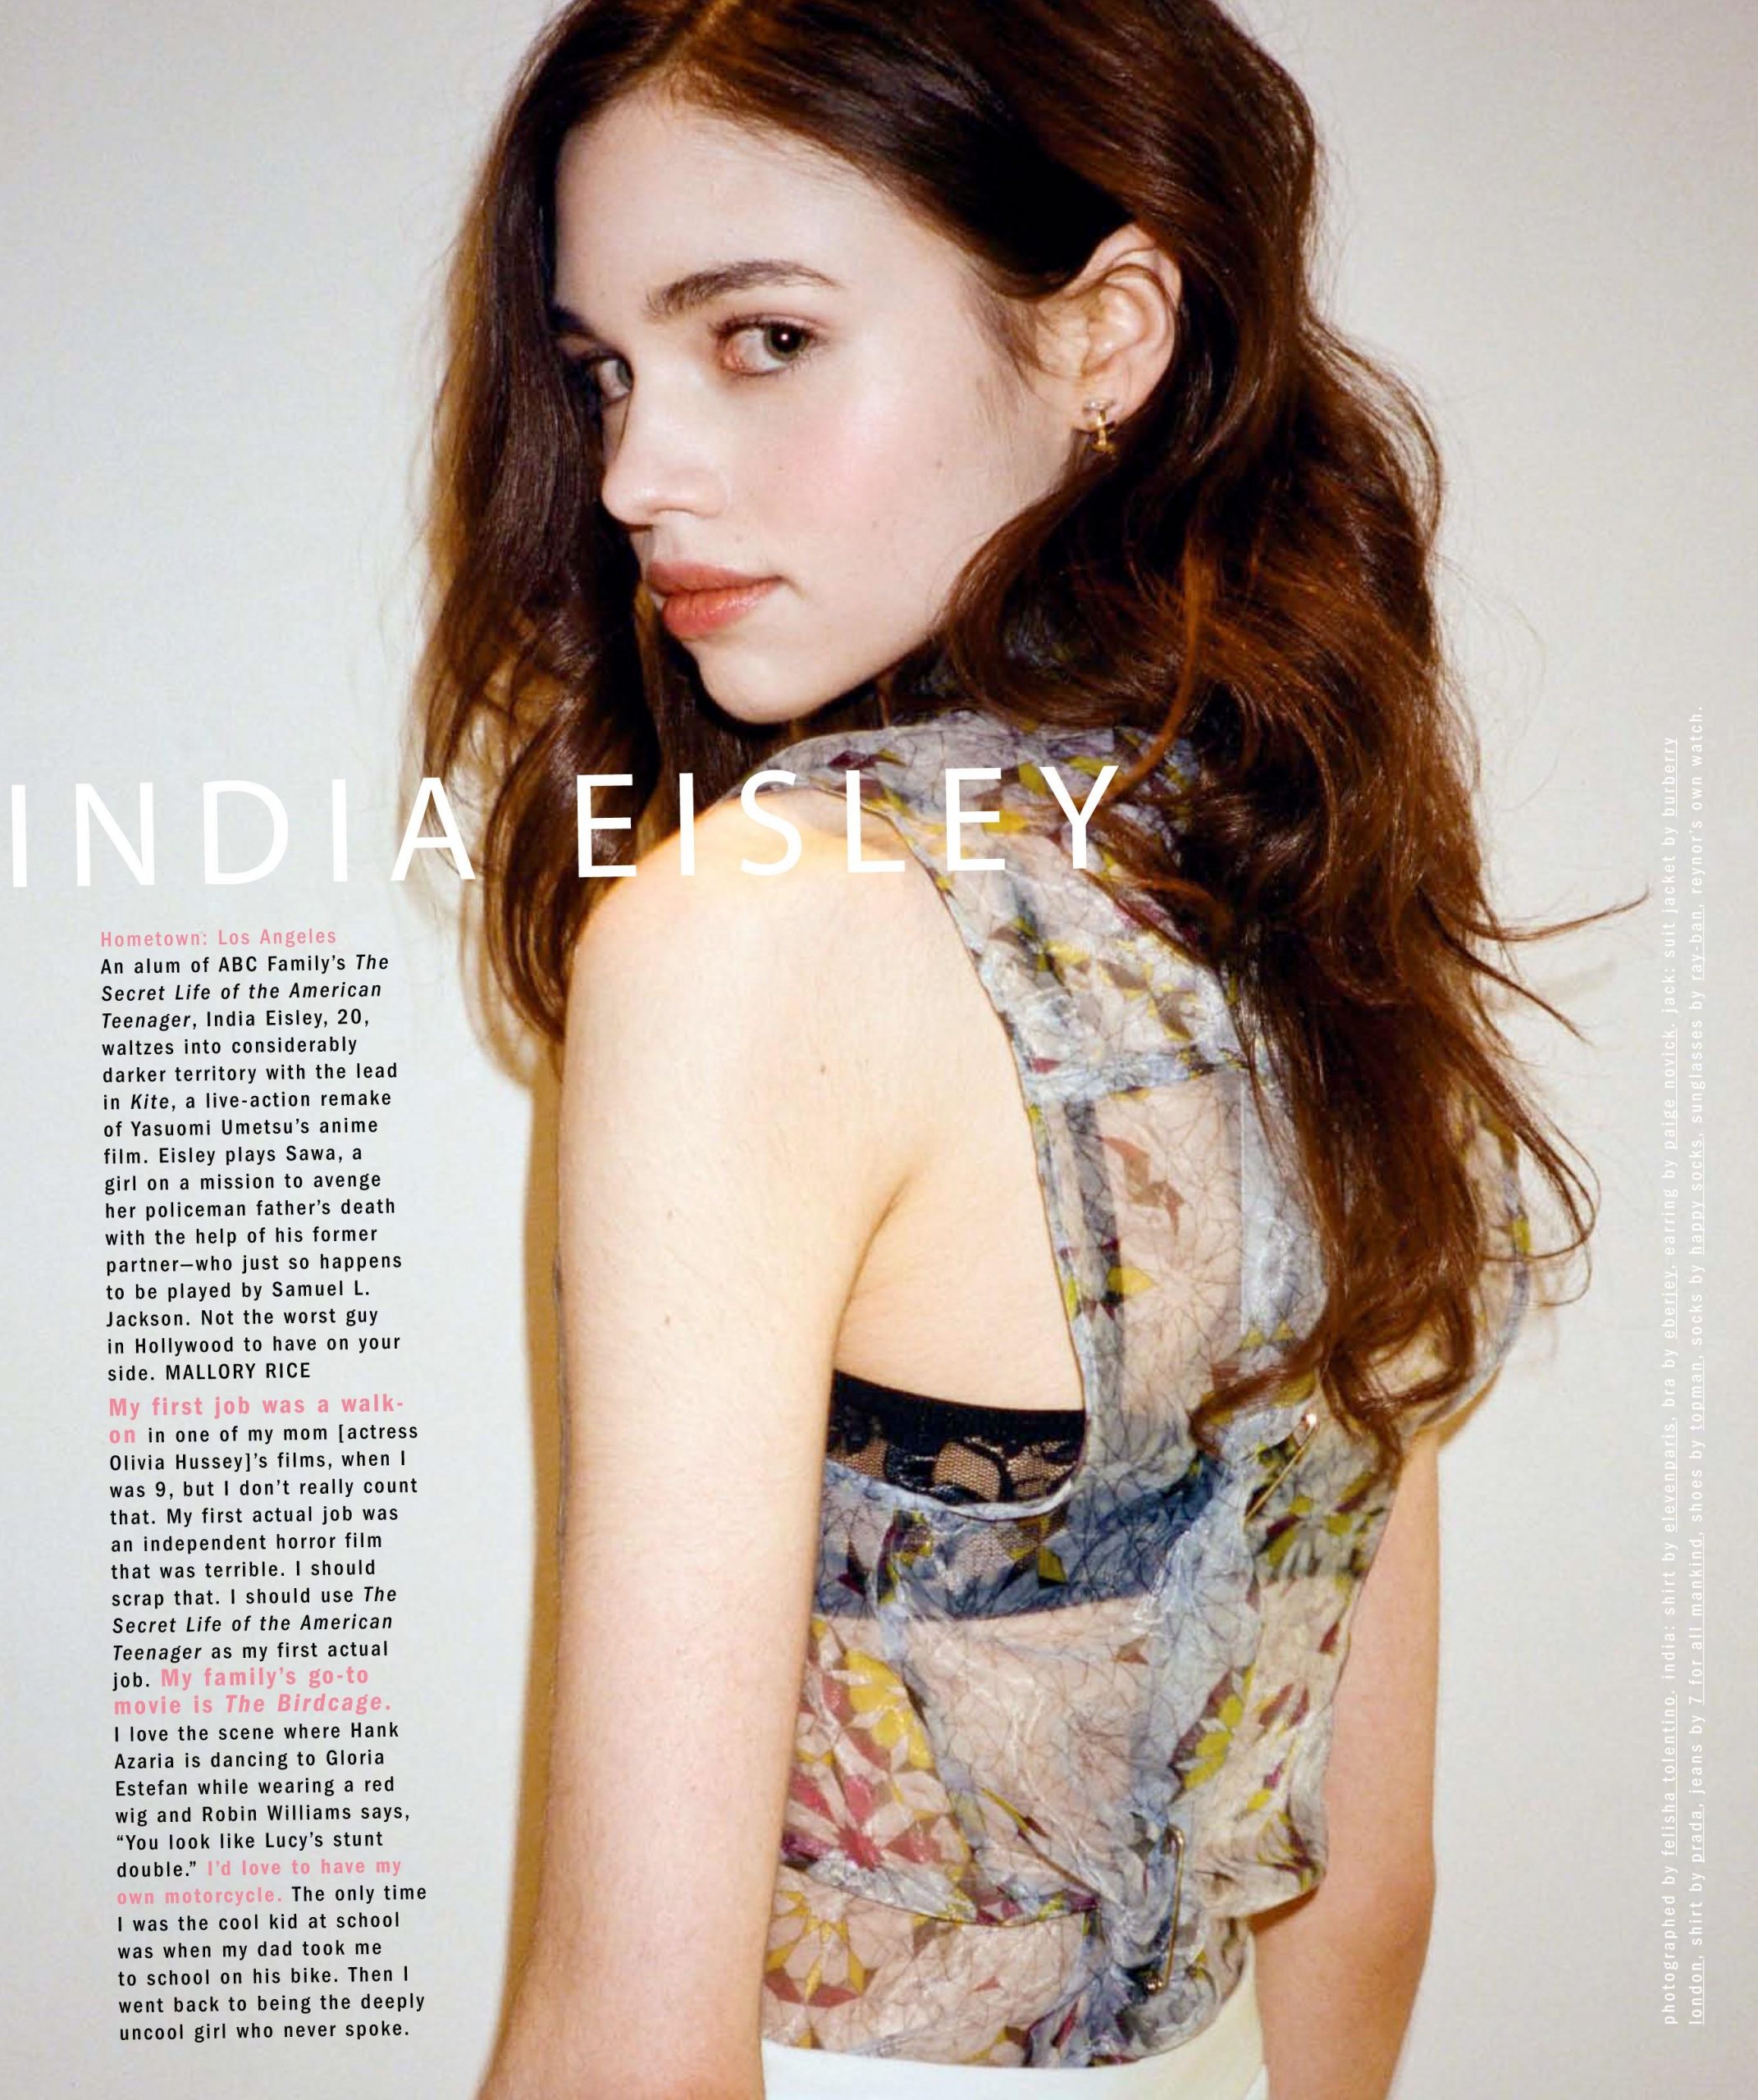 49 India Eisley Nude Pictures Can Make You Submit To Her Glitzy Looks 22